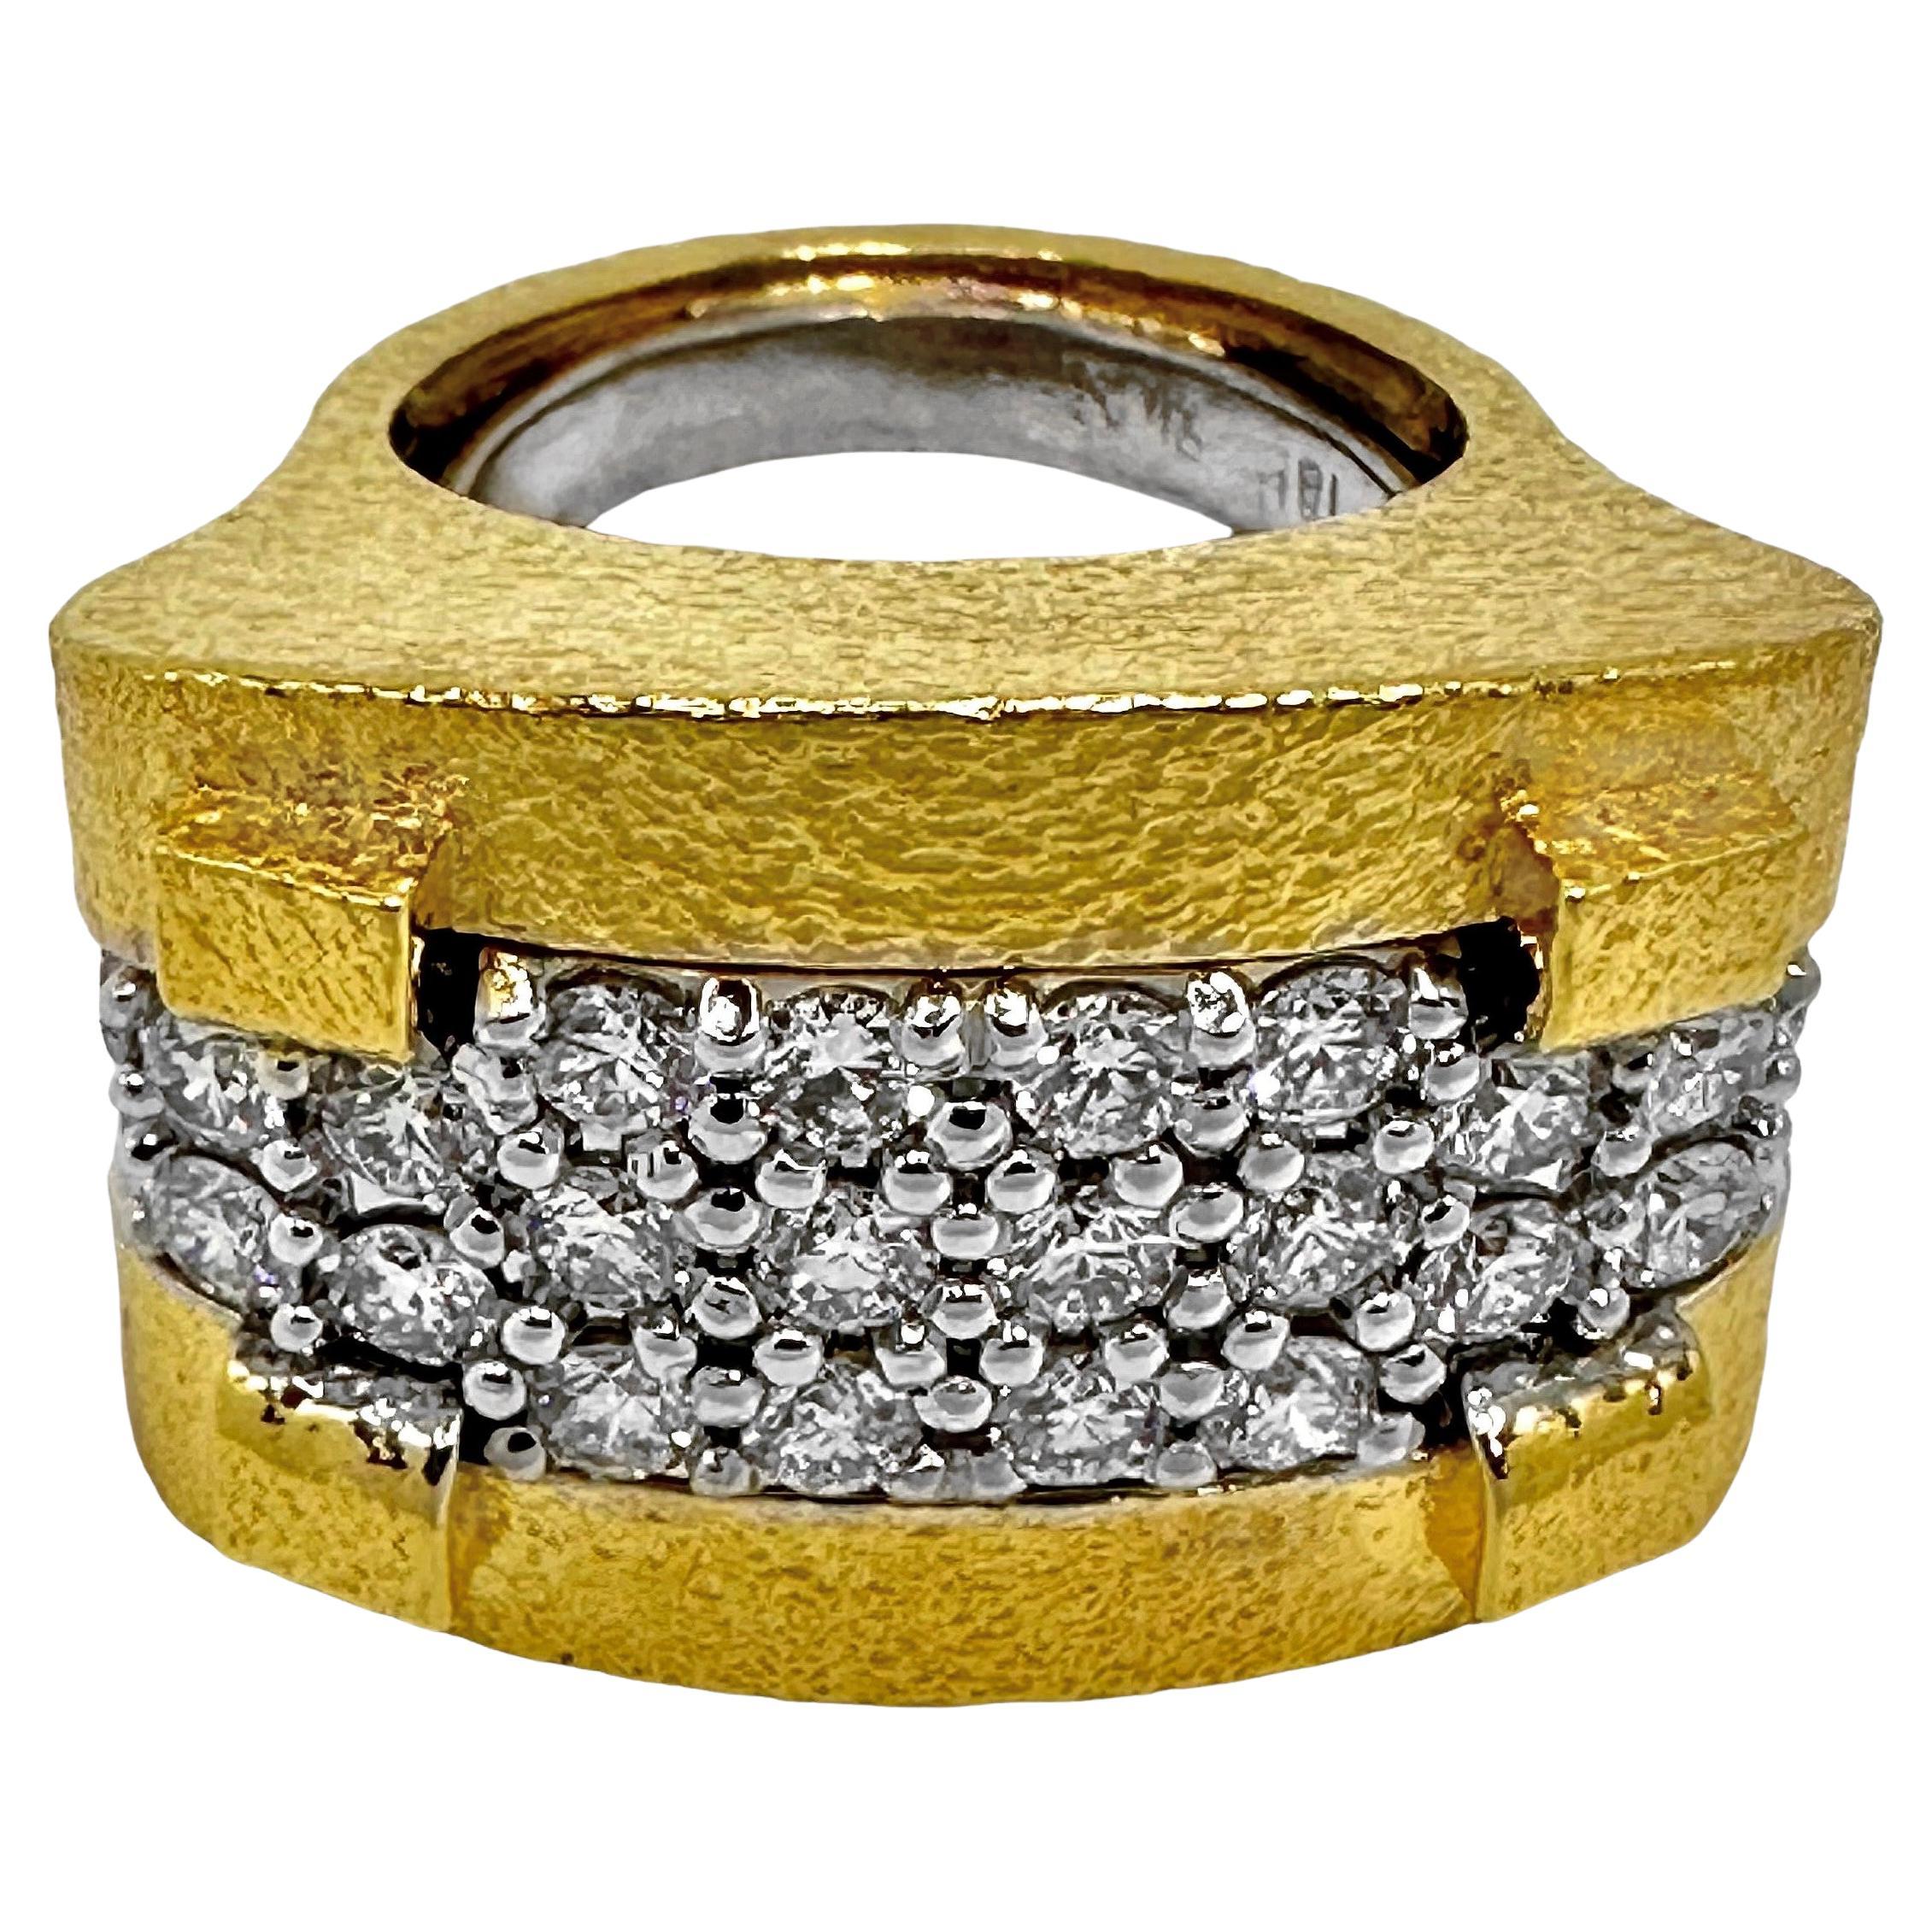 This crisp and intriguing 18K yellow gold, platinum and diamond architectural ring was manufactured in our own shop and to extremely high standards. The ring measures a full one inch in length, 3/4 inches in width and is intricately hammer finished